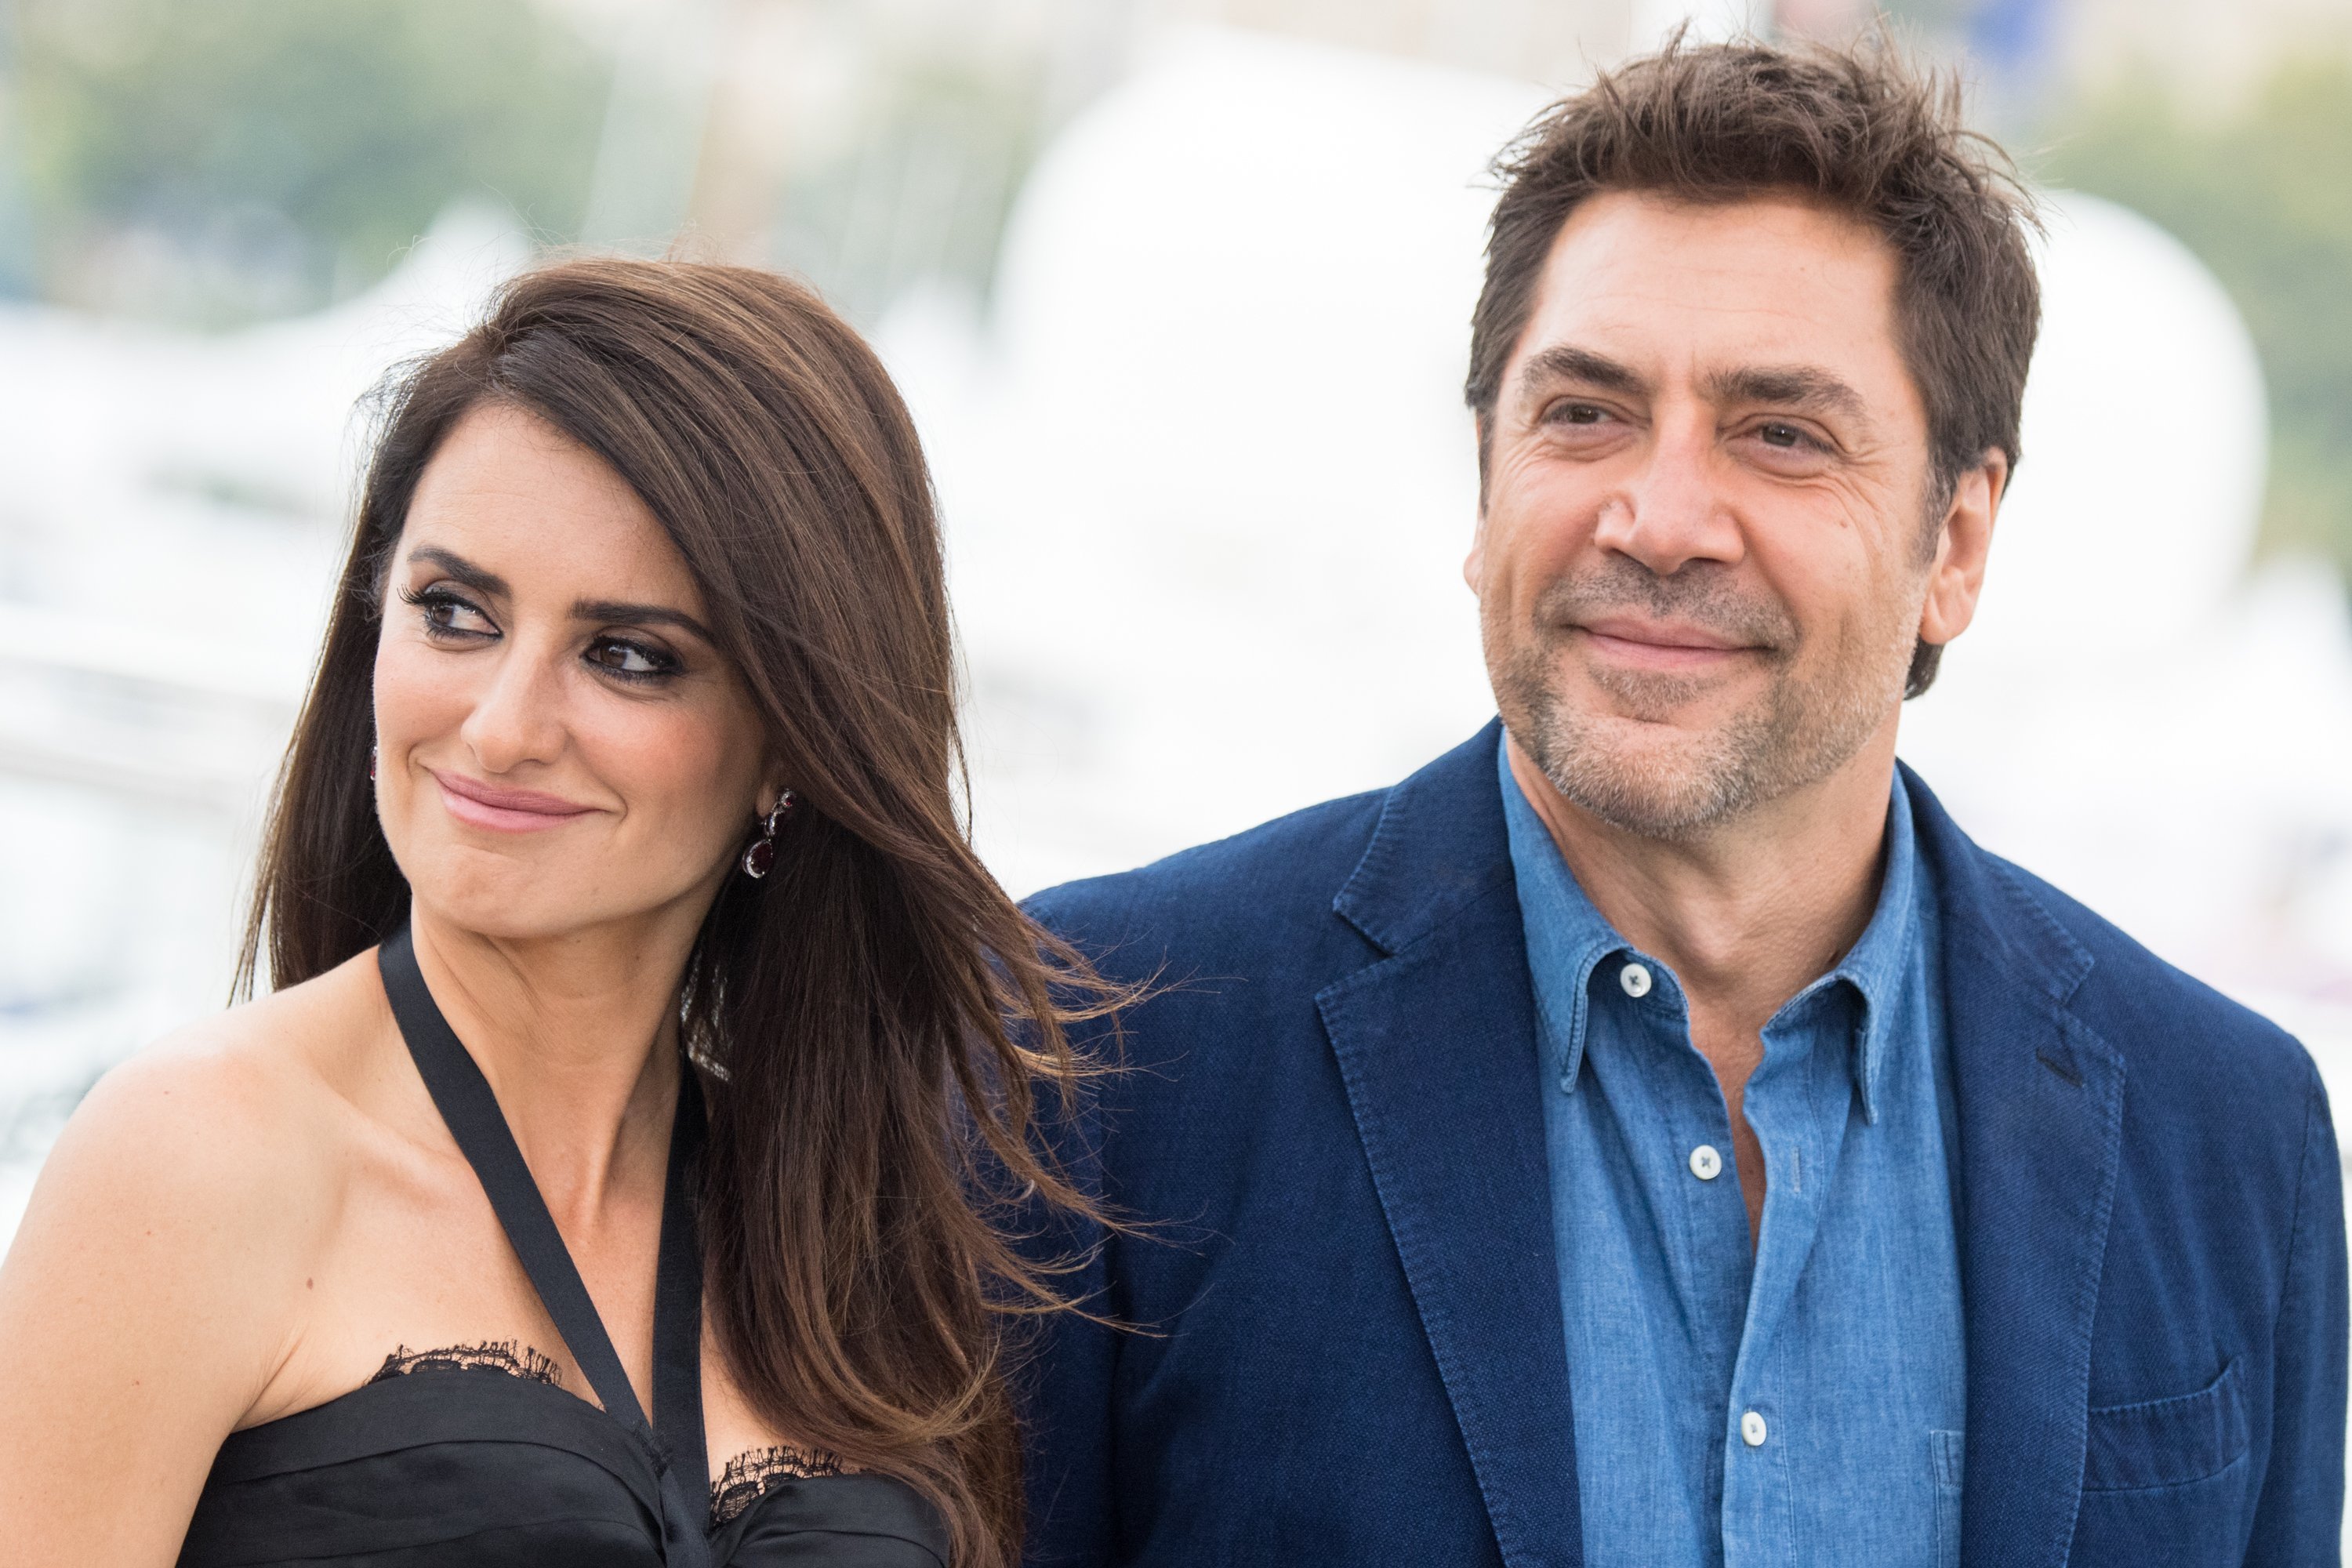 Penelope Cruz and Javier Bardem attend a photocool for "Everybody Knows" at the Cannes Film Festival in France on May 9, 2018 | Photo: Getty Images